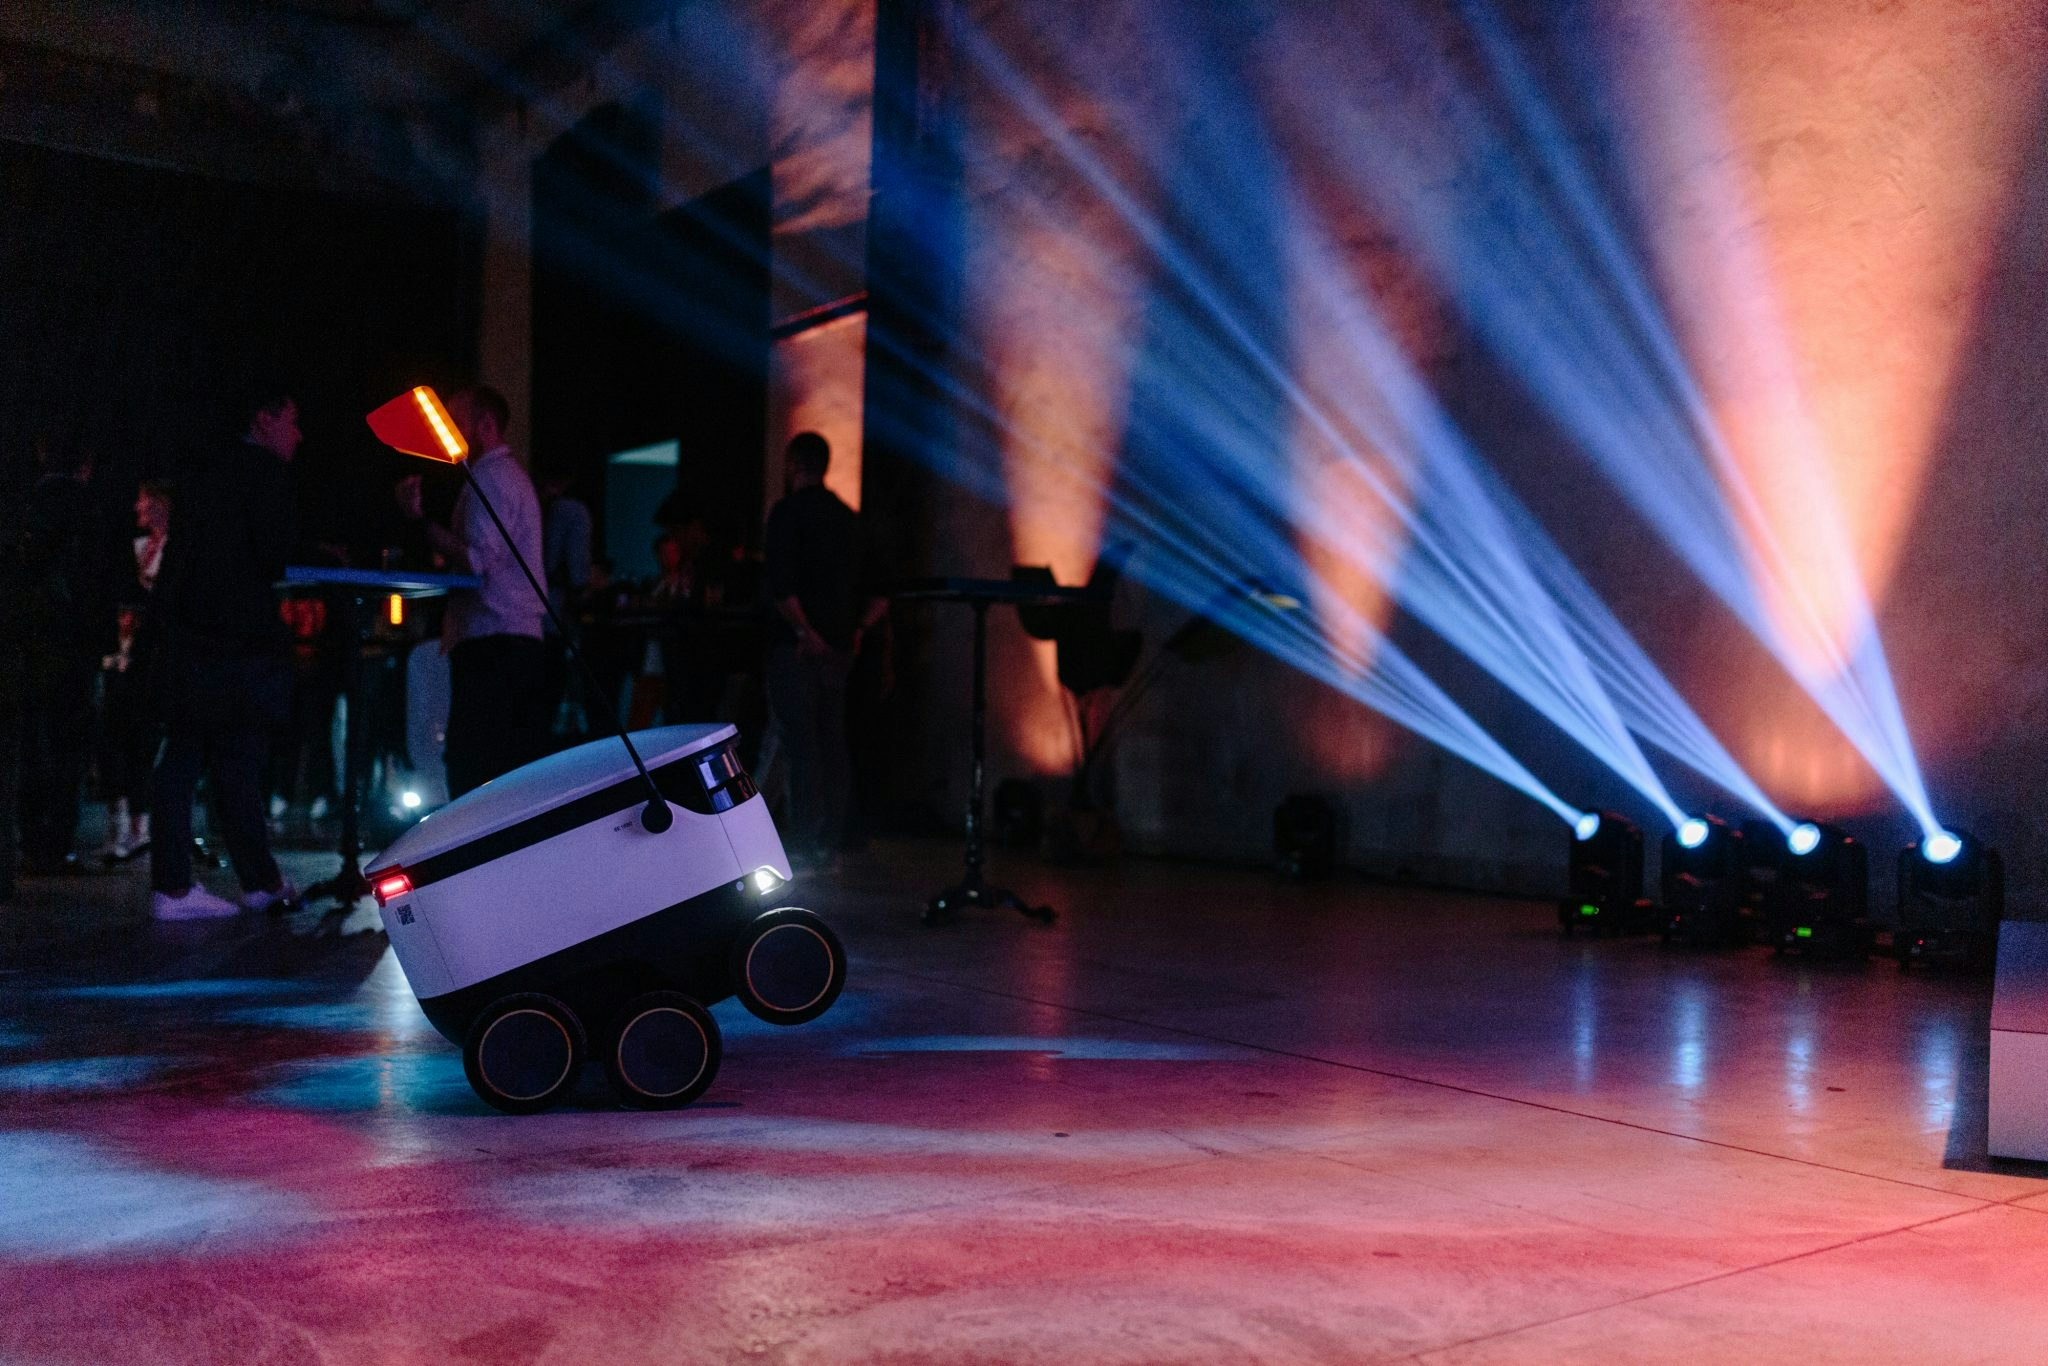 Starship Technologies' robots stole quite a bit of the limelight